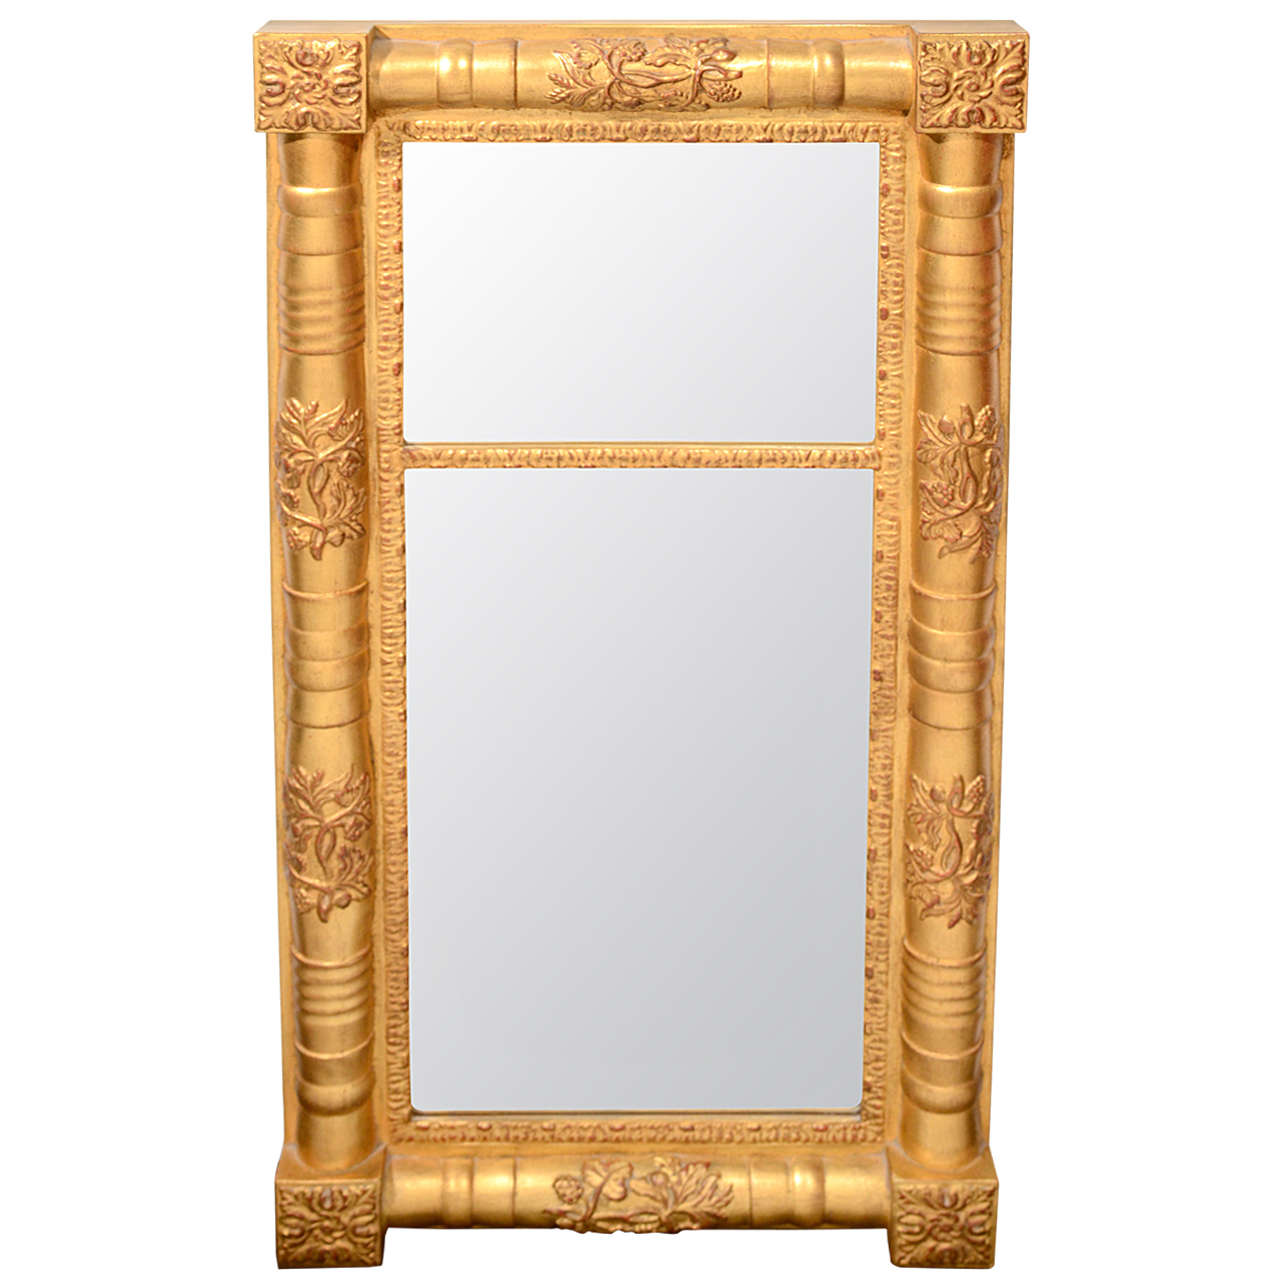 Traditional Wood Mirror with Hand Laid Antique Gold Leaf and Hand-Carved Designs